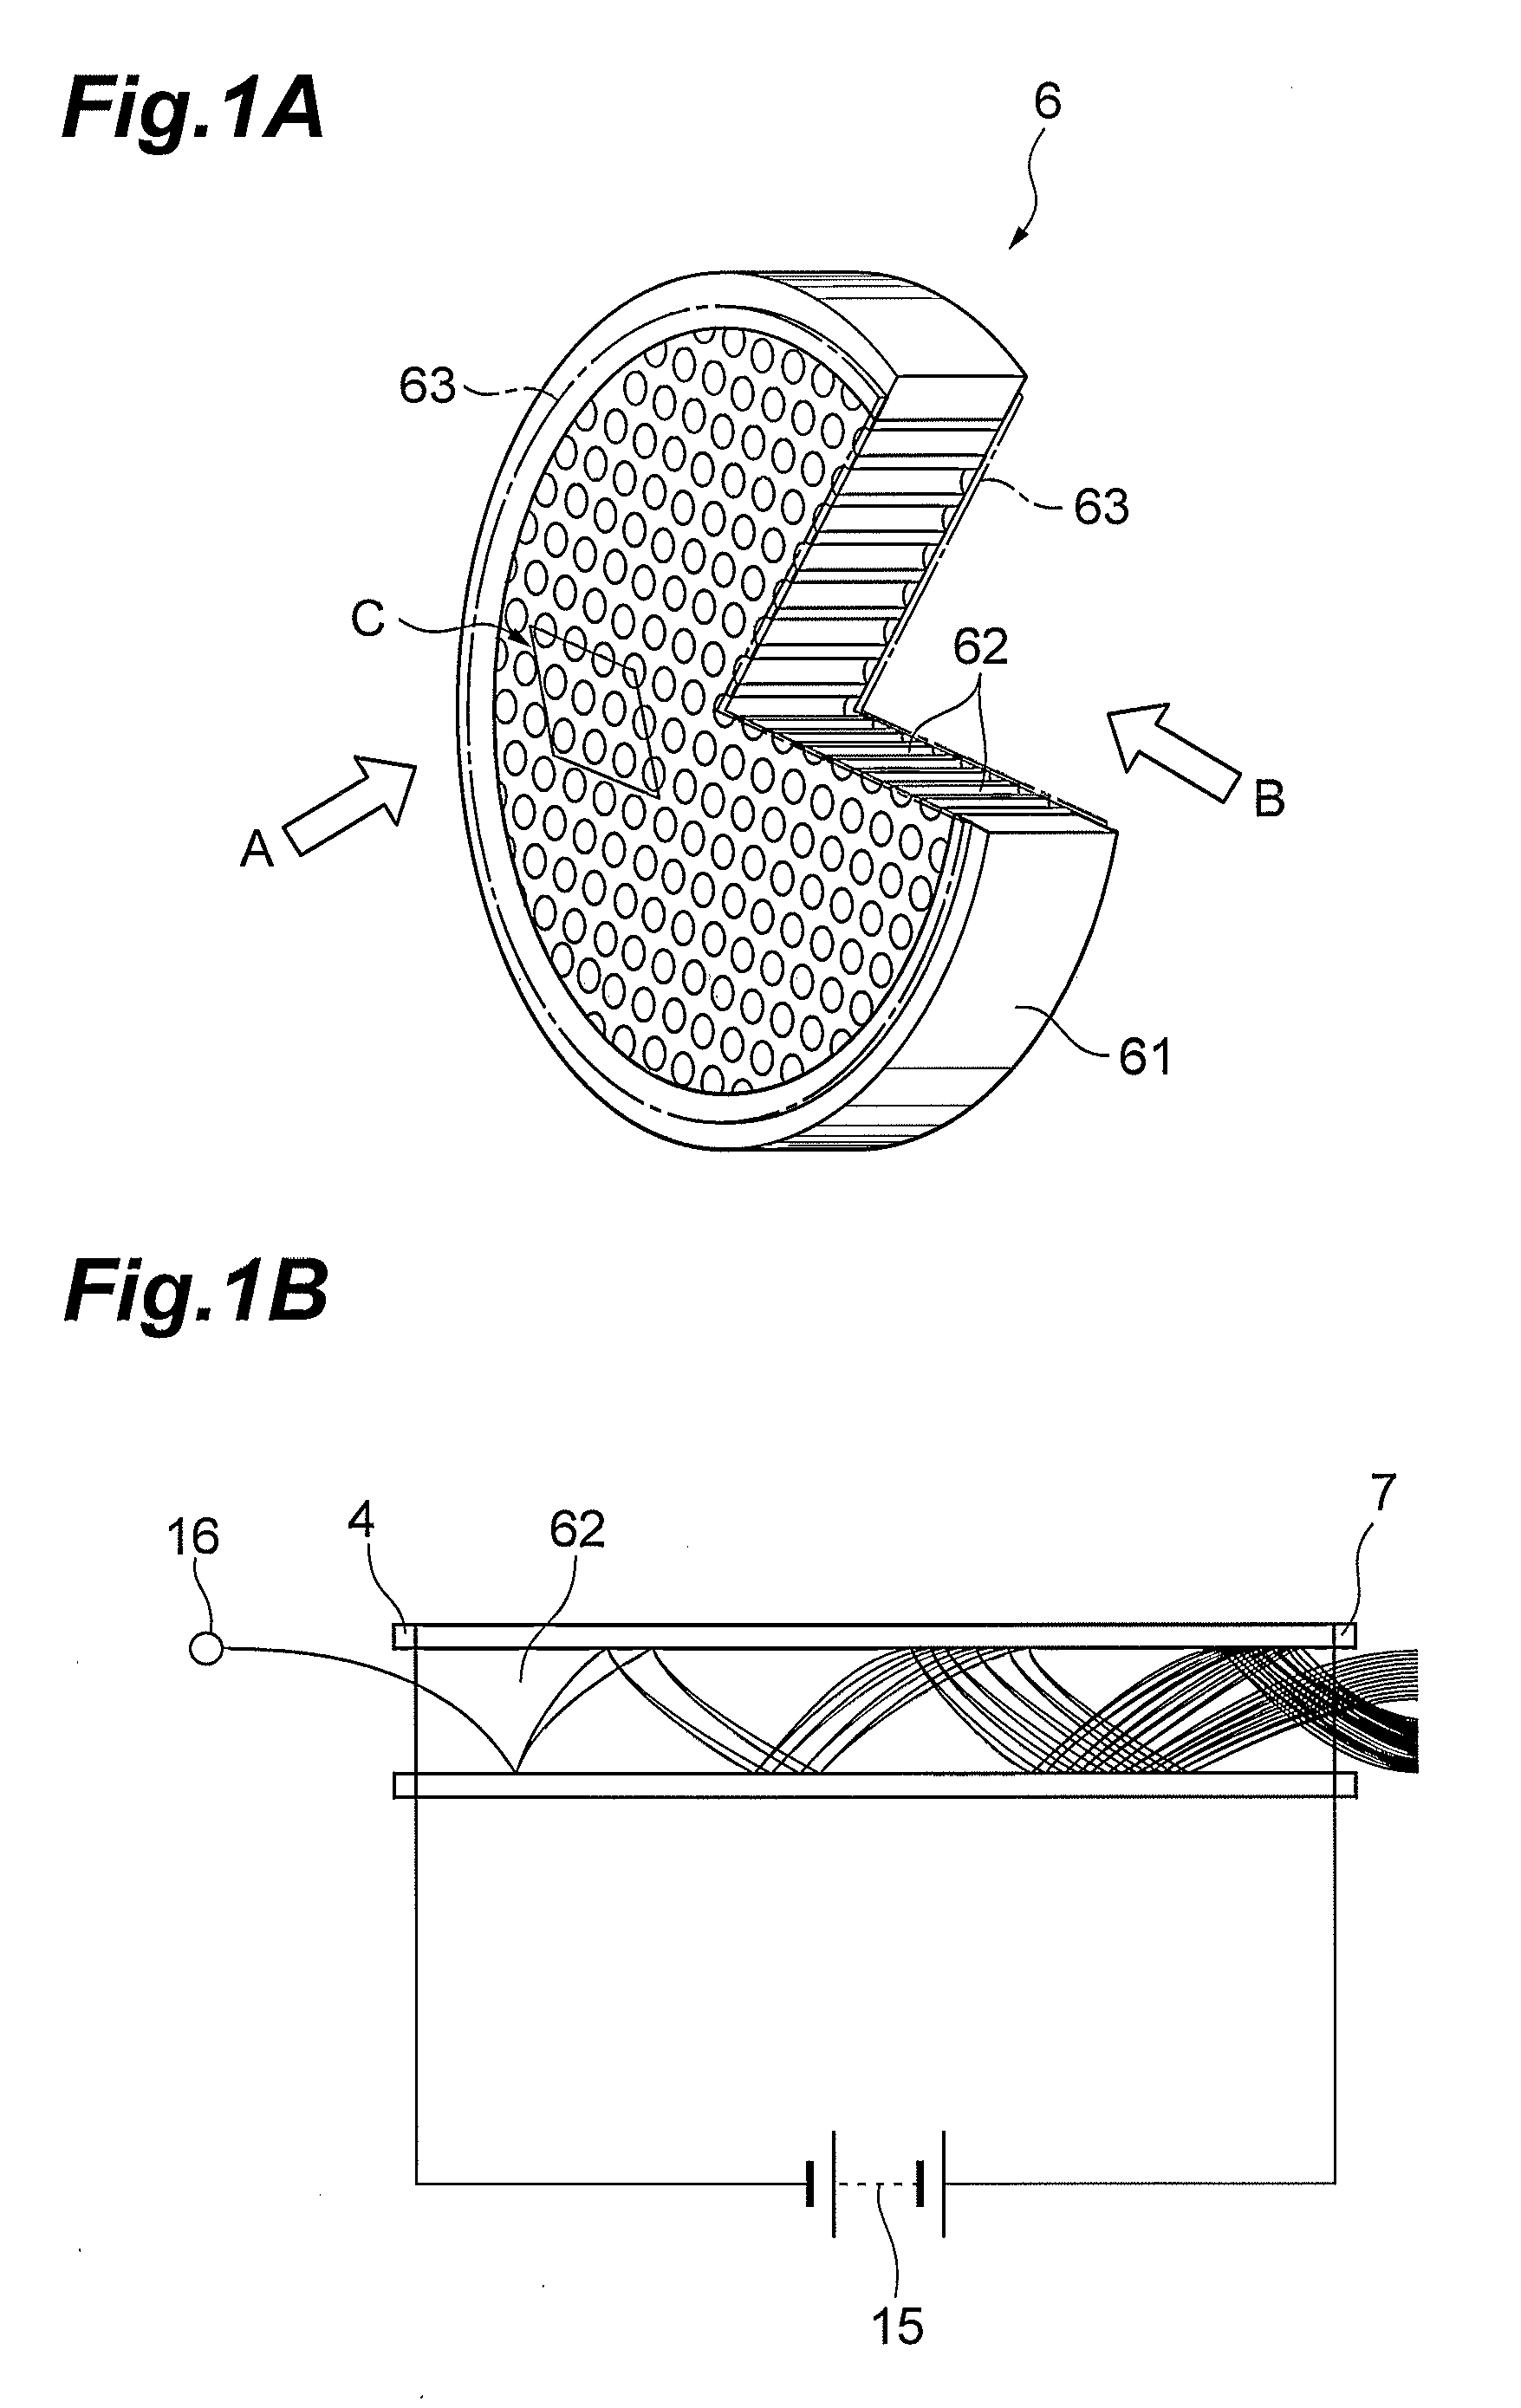 Microchannel plate having a main body, image intensifier, ion detector, and inspection device